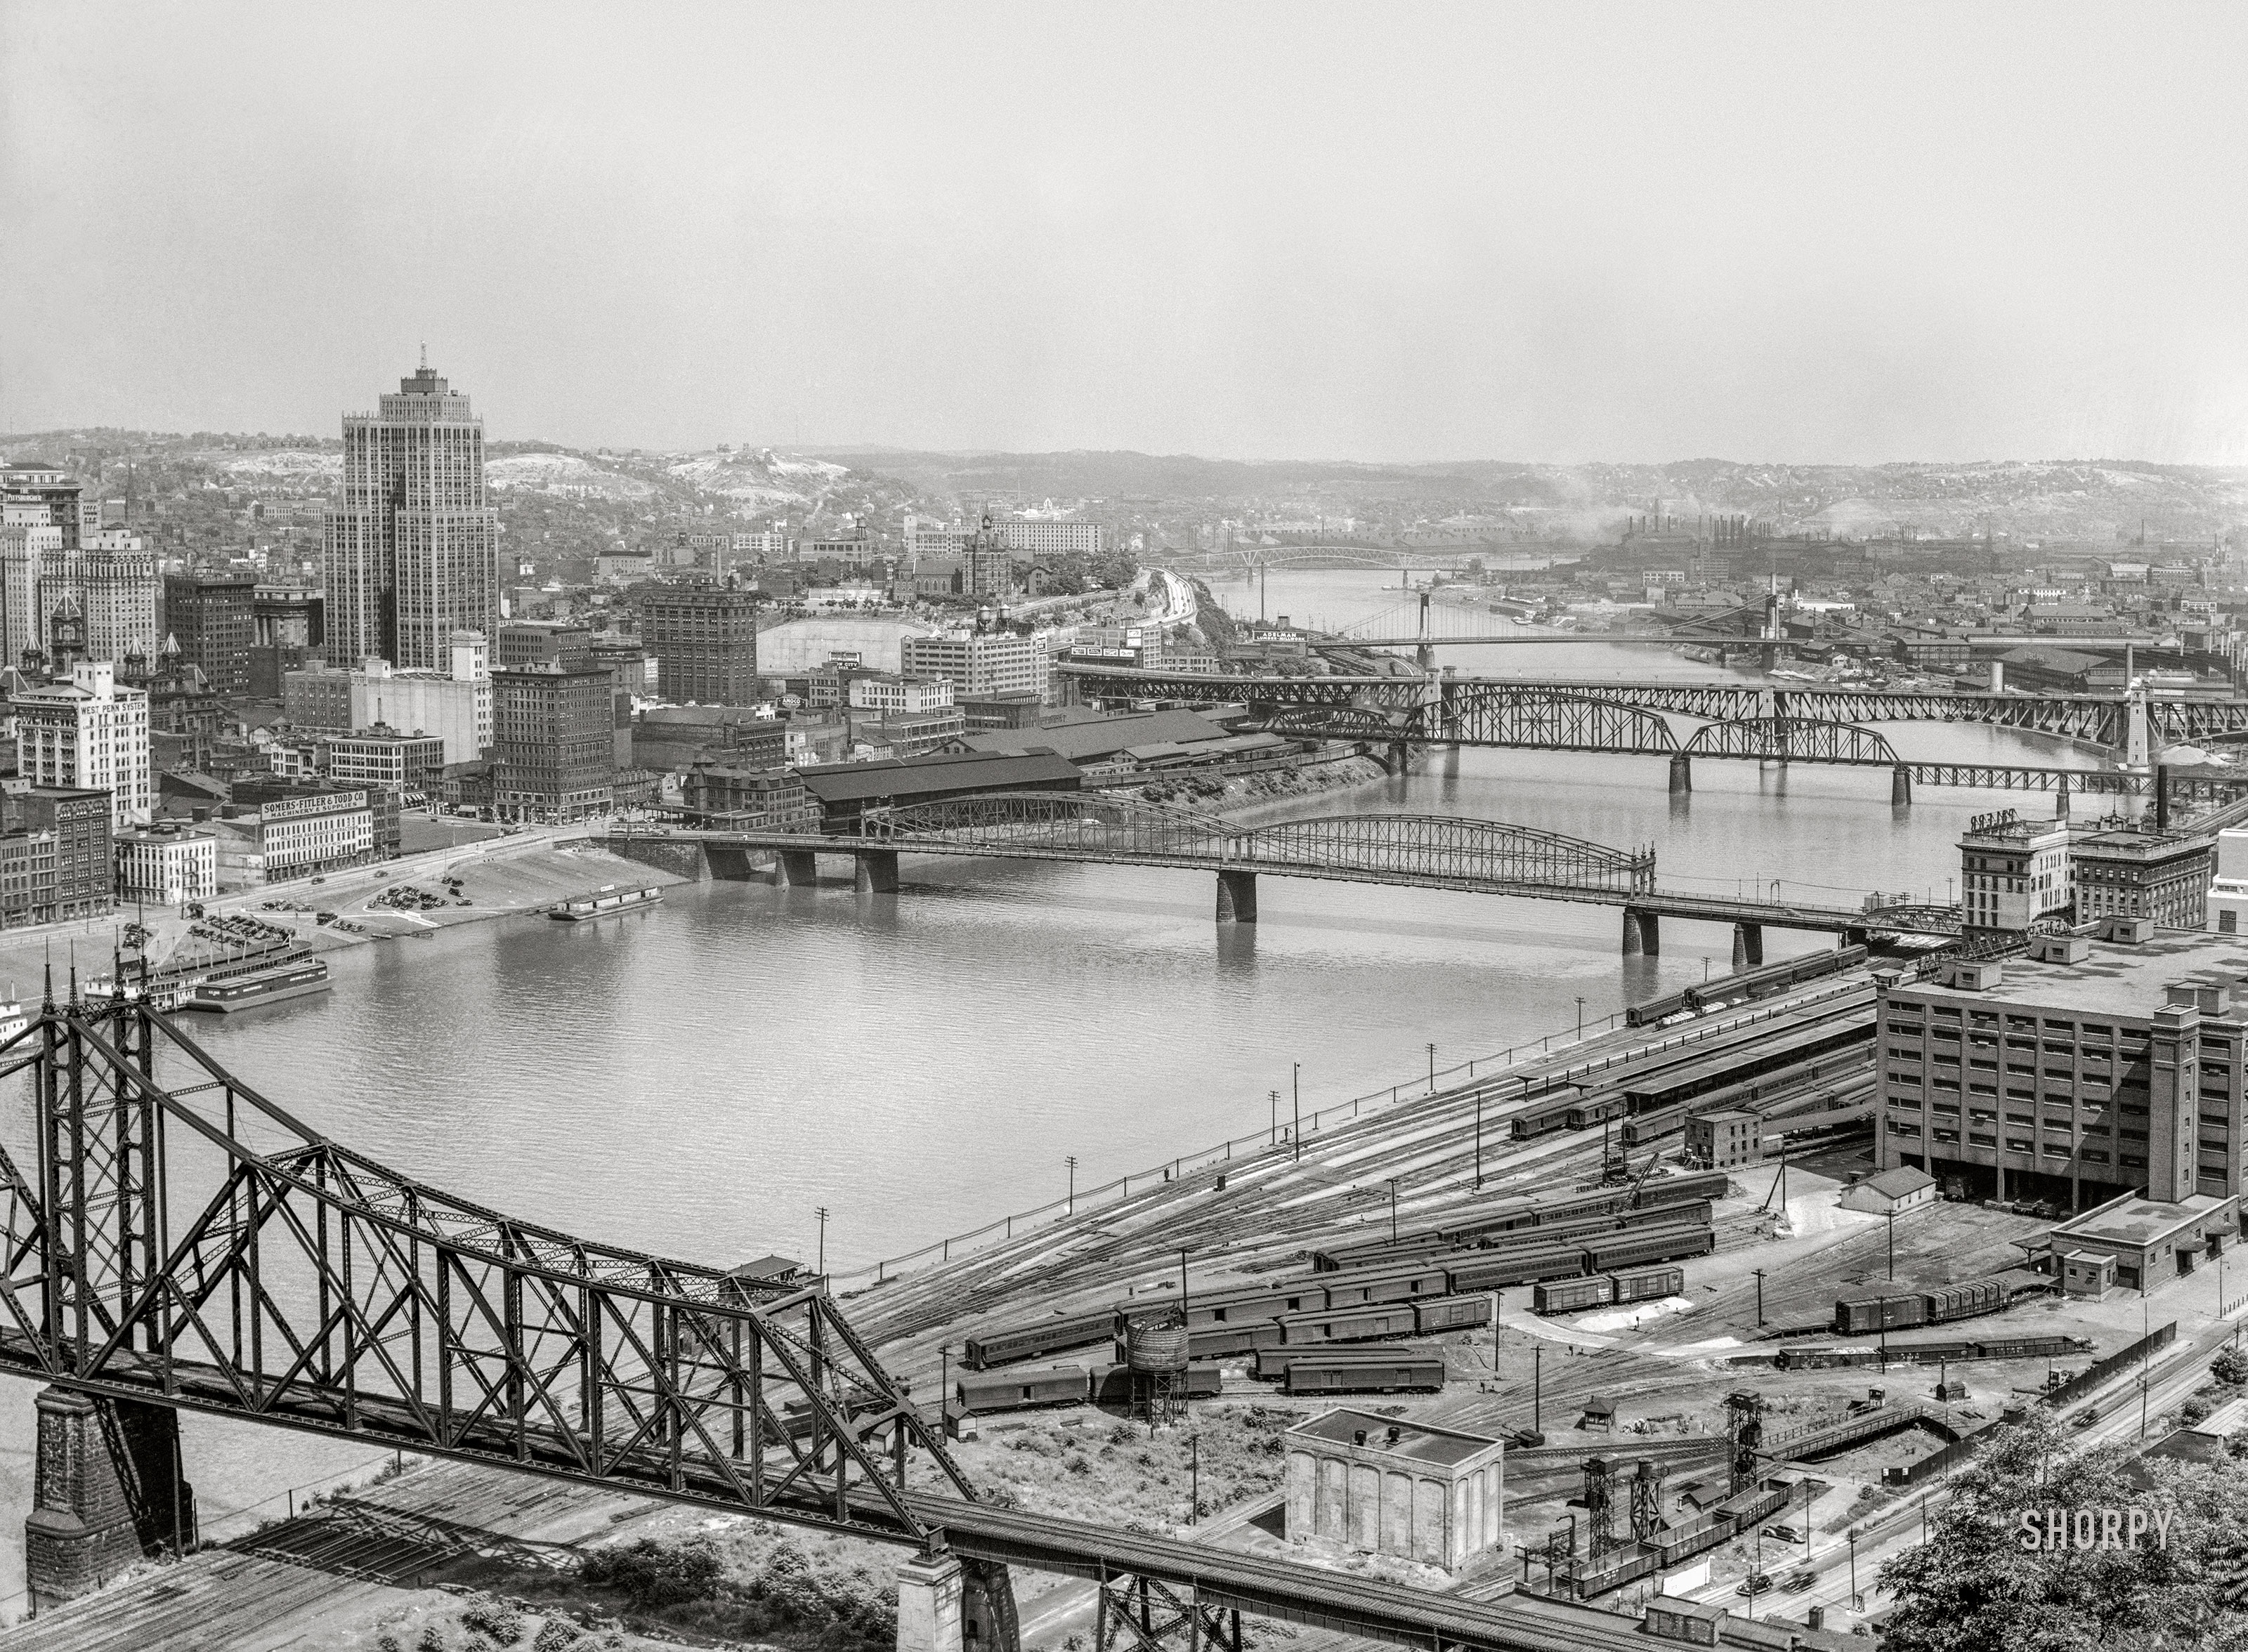 July 1938. "Looking north. Monongahela River, Pittsburgh, Pennsylvania." Medium format acetate negative by Arthur Rothstein for the Farm Security Administration. View full size.